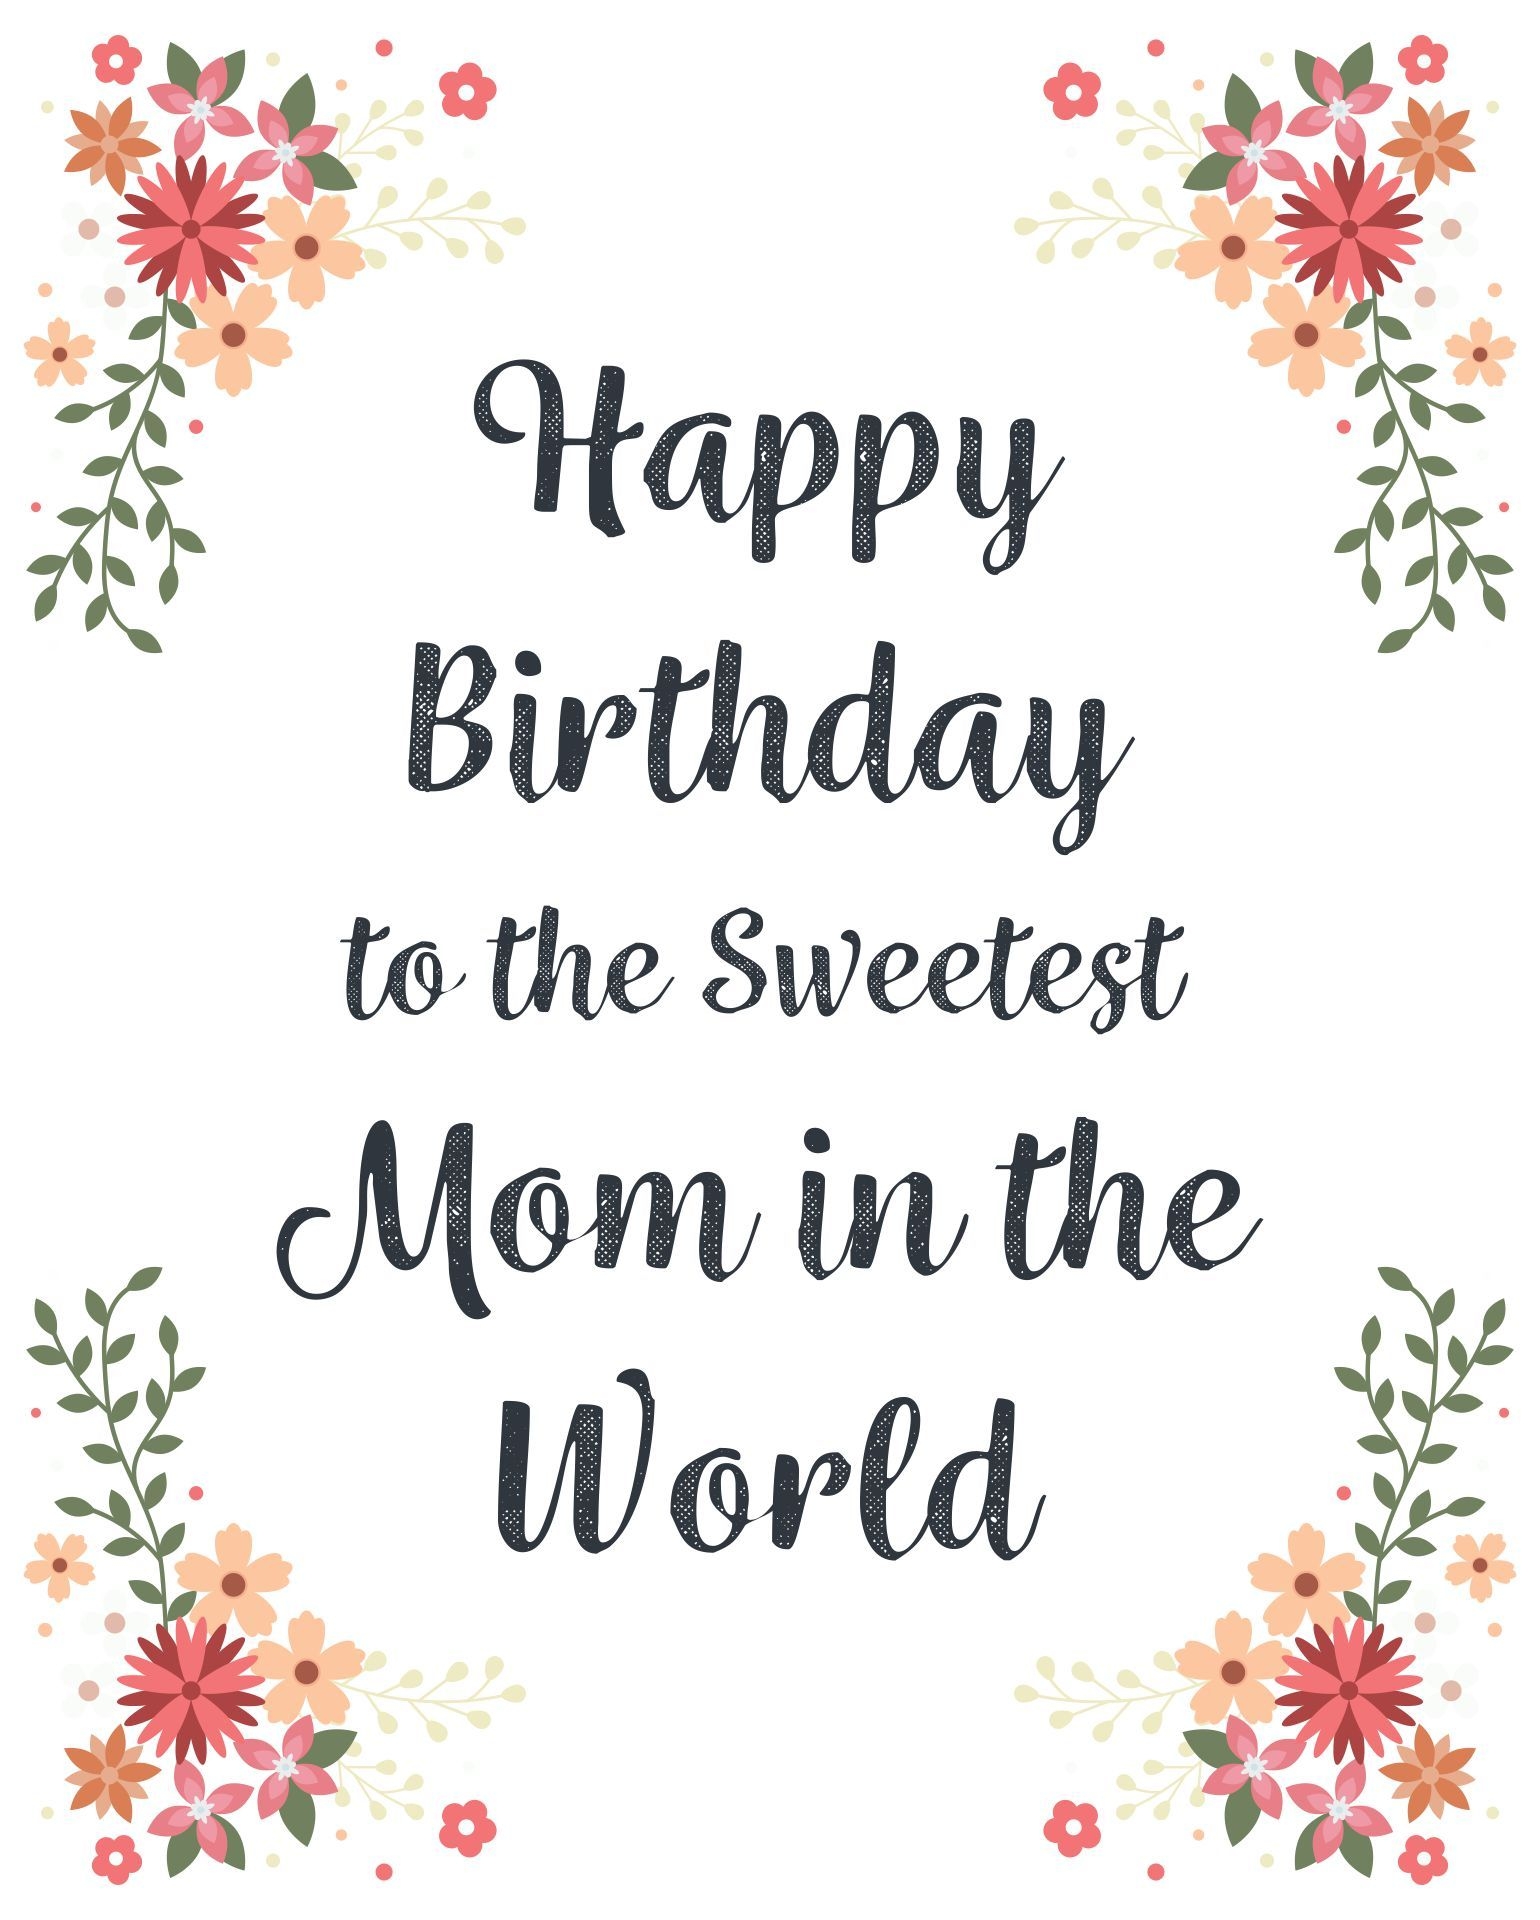 Printable Birthday Cards For Mom From Daughter Birthday Cards For Mom Happy Birthday Mom Cards Free Printable Birthday Cards - Free Printable Birthday Cards For Mom